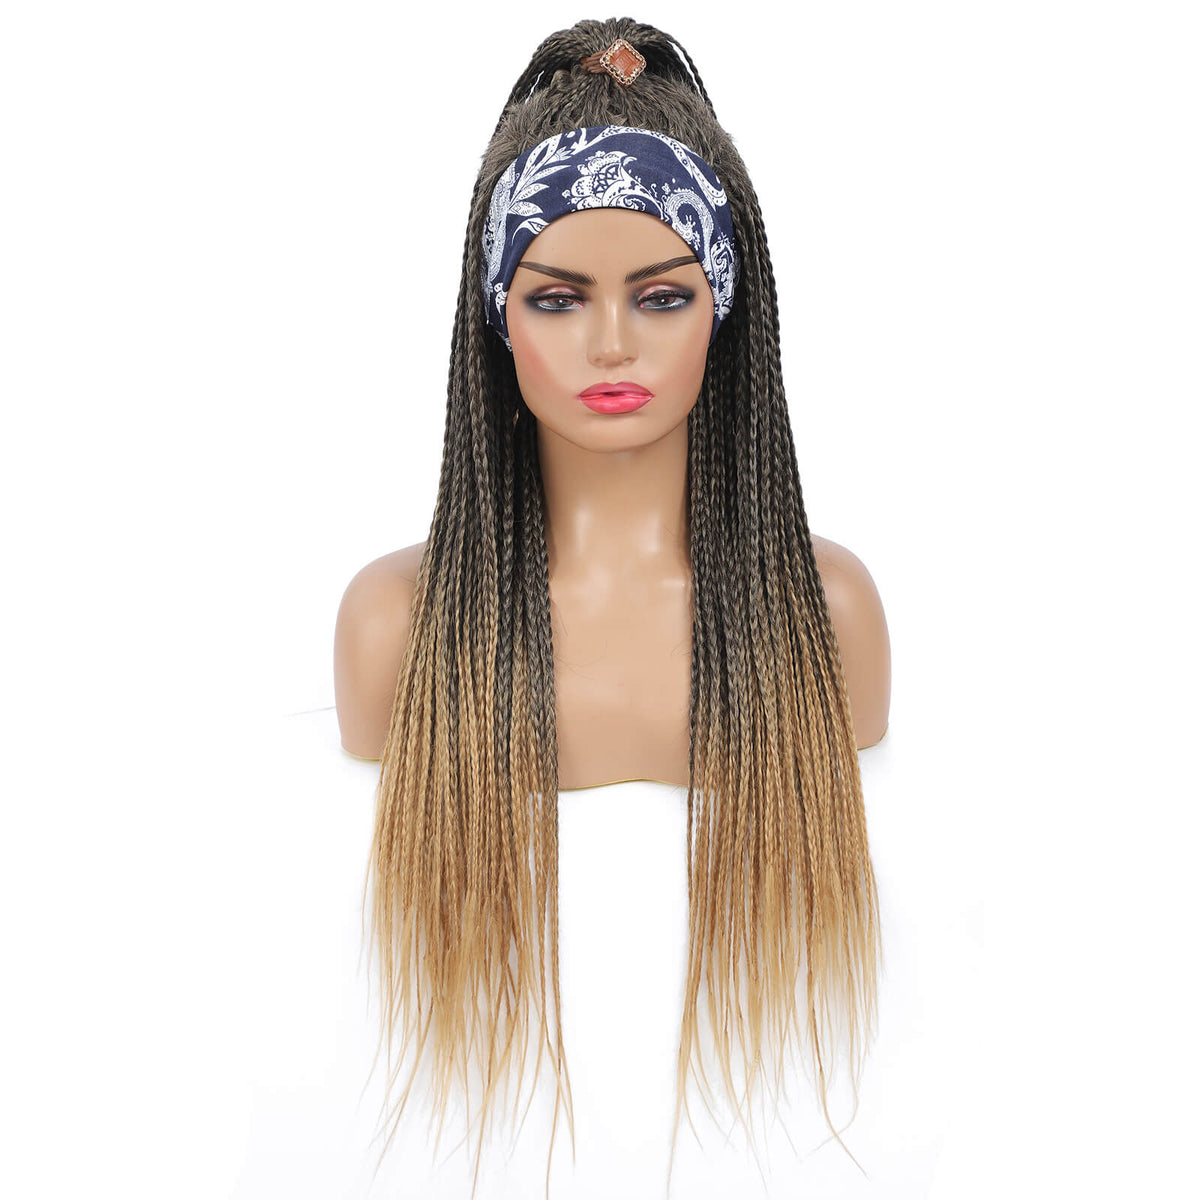 Headband Wigs Box Braided Wigs For Black Women Ponytail Style Color Blonde